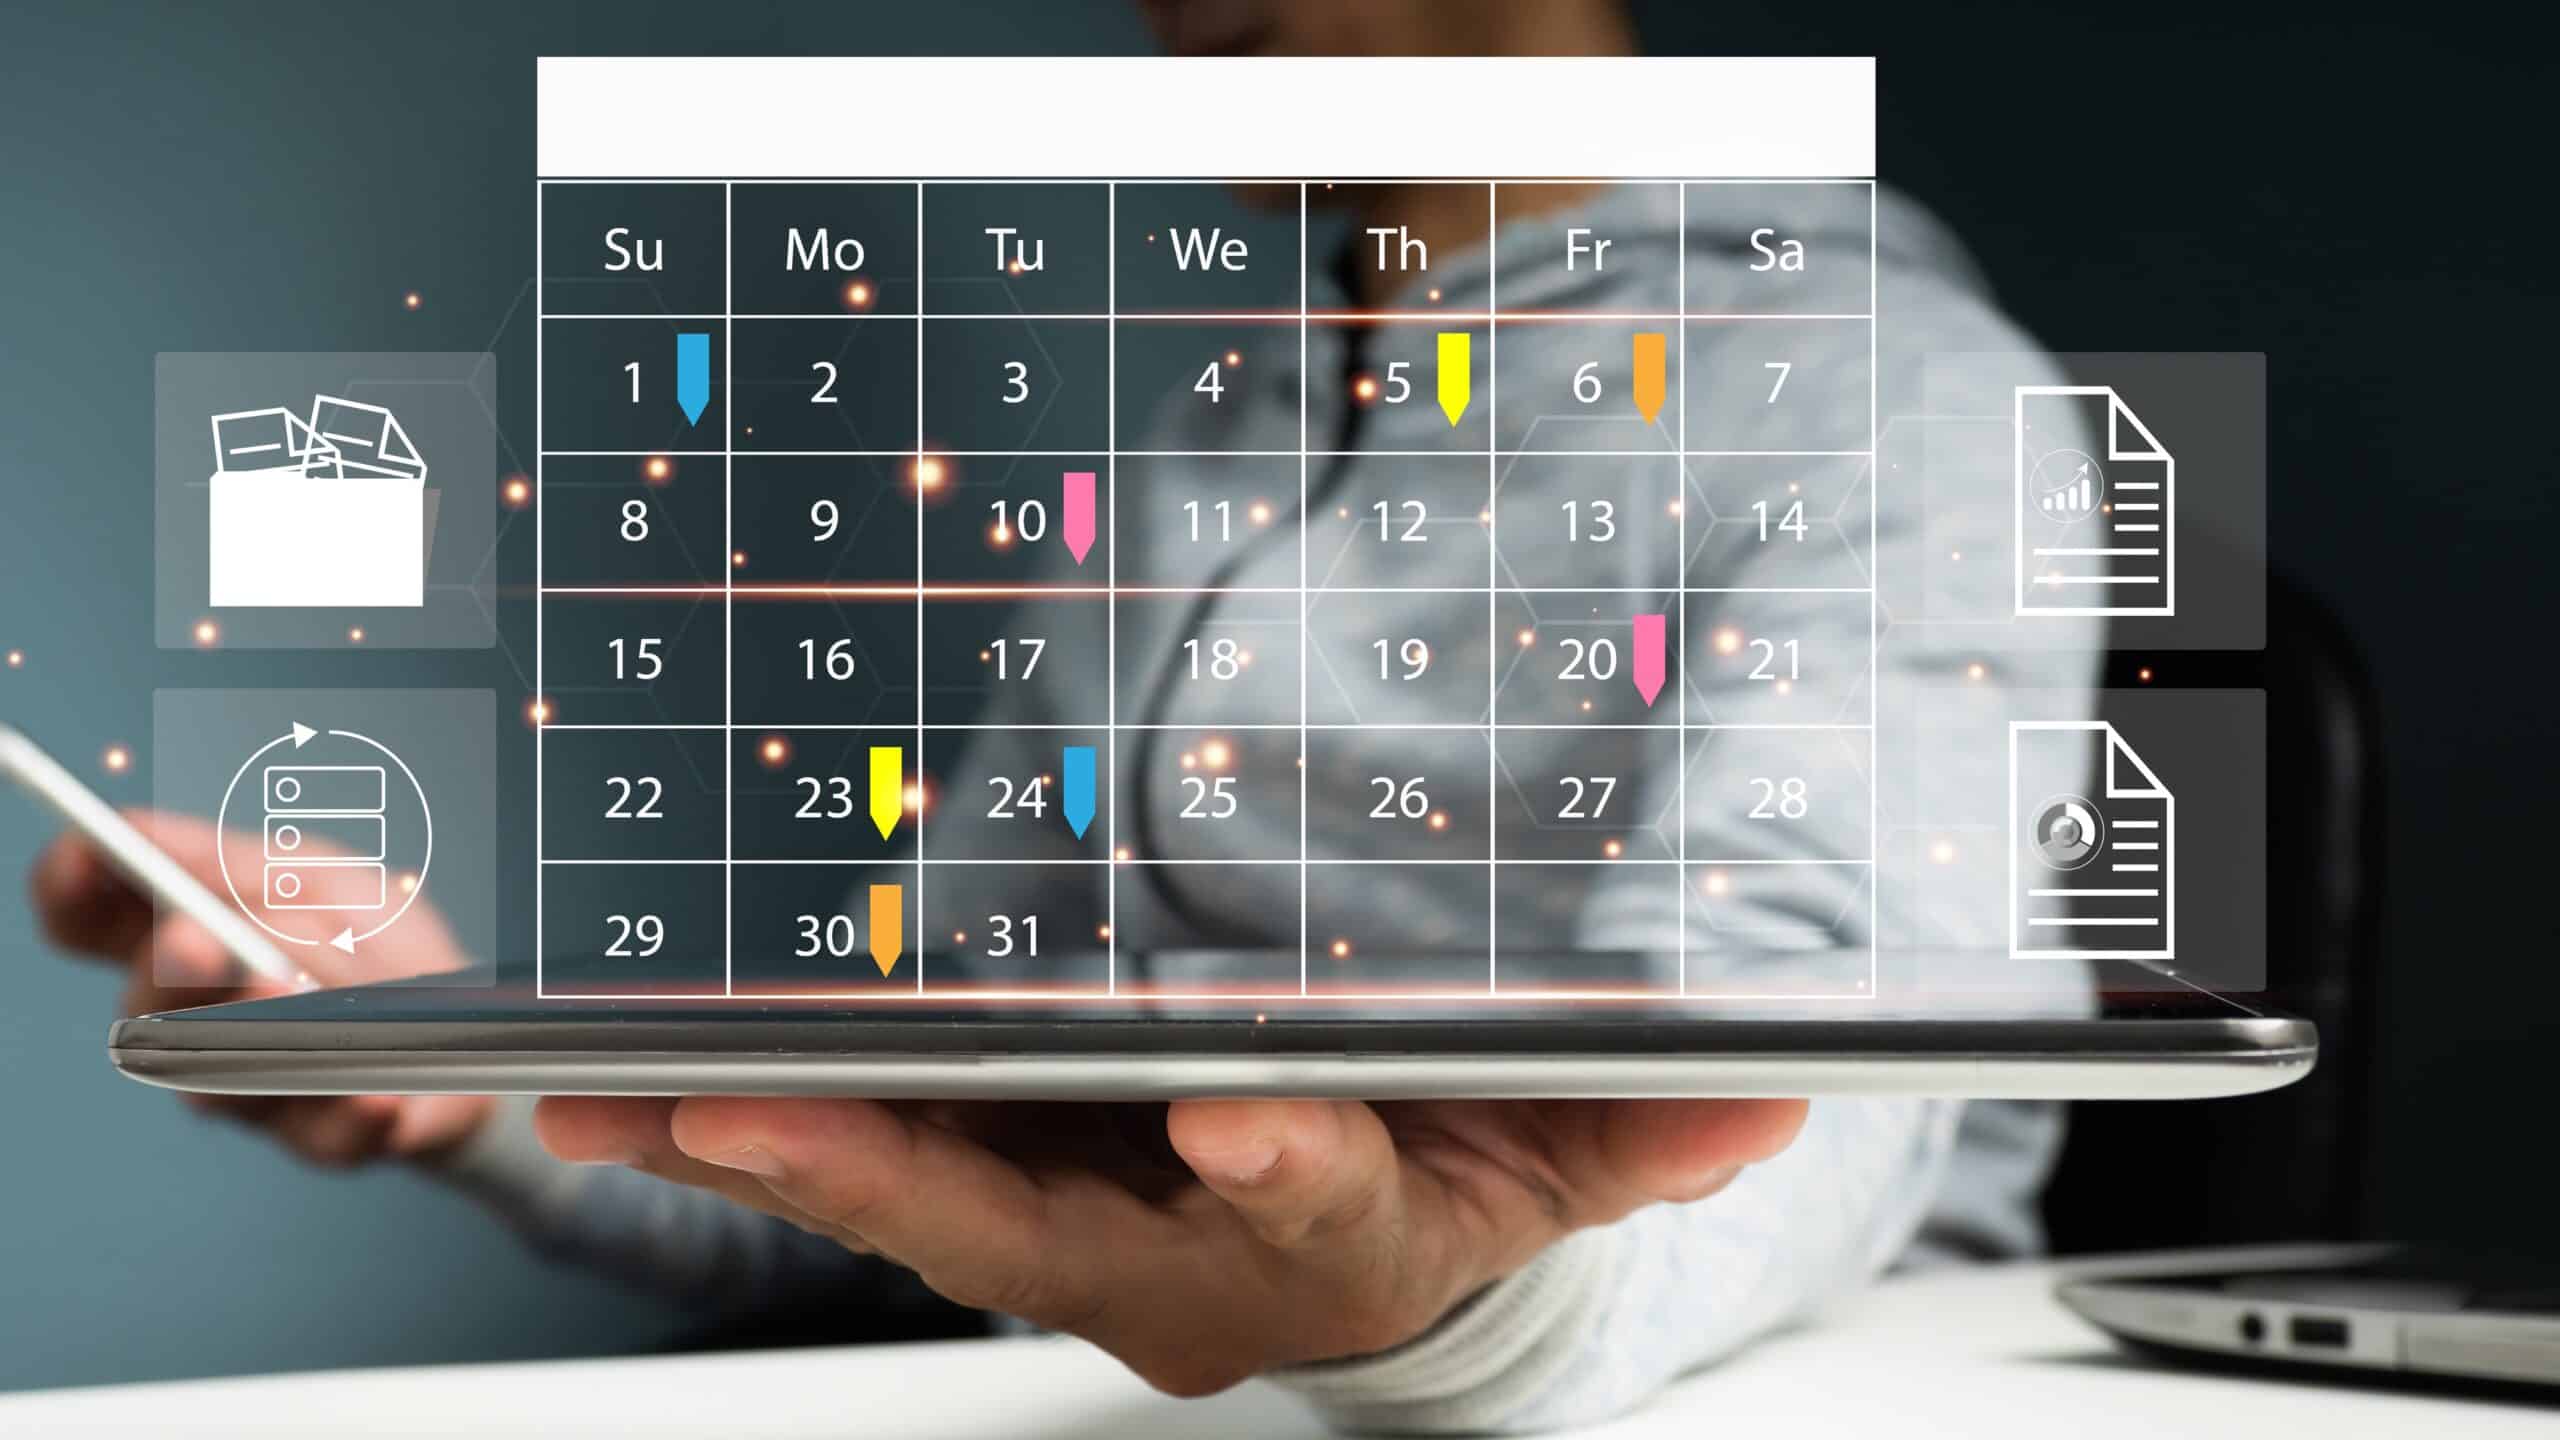 On office table, a man is using his mobile phone and making appointment on the calendar desk using Microsoft Bookings.